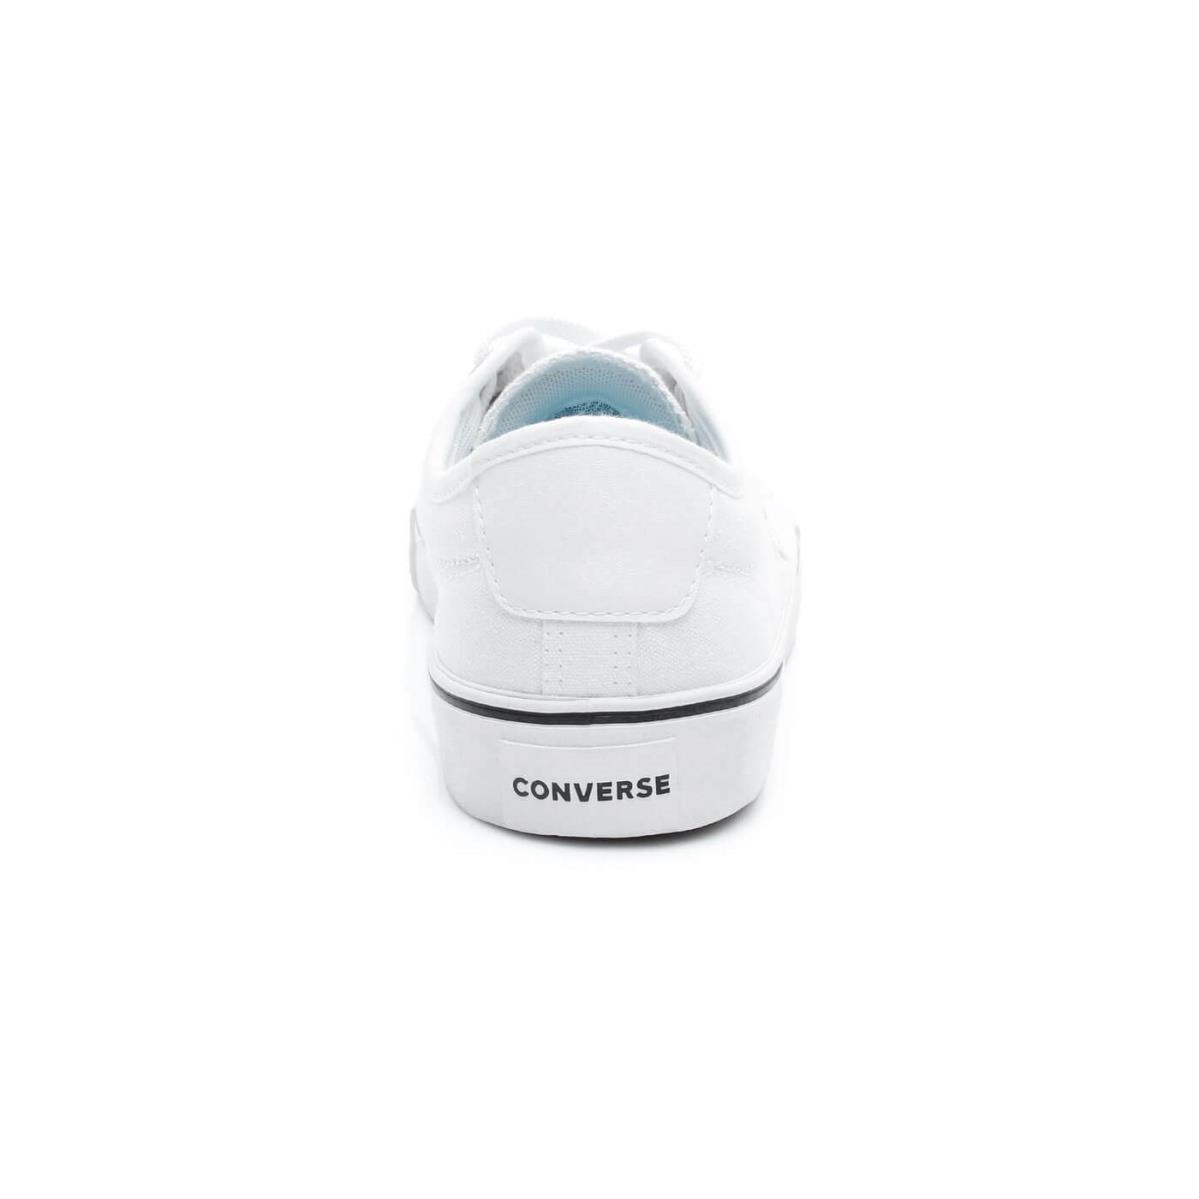 Converse Star Replay Star of The Show Unisex White Canvas Sneakers Size 11/12.5